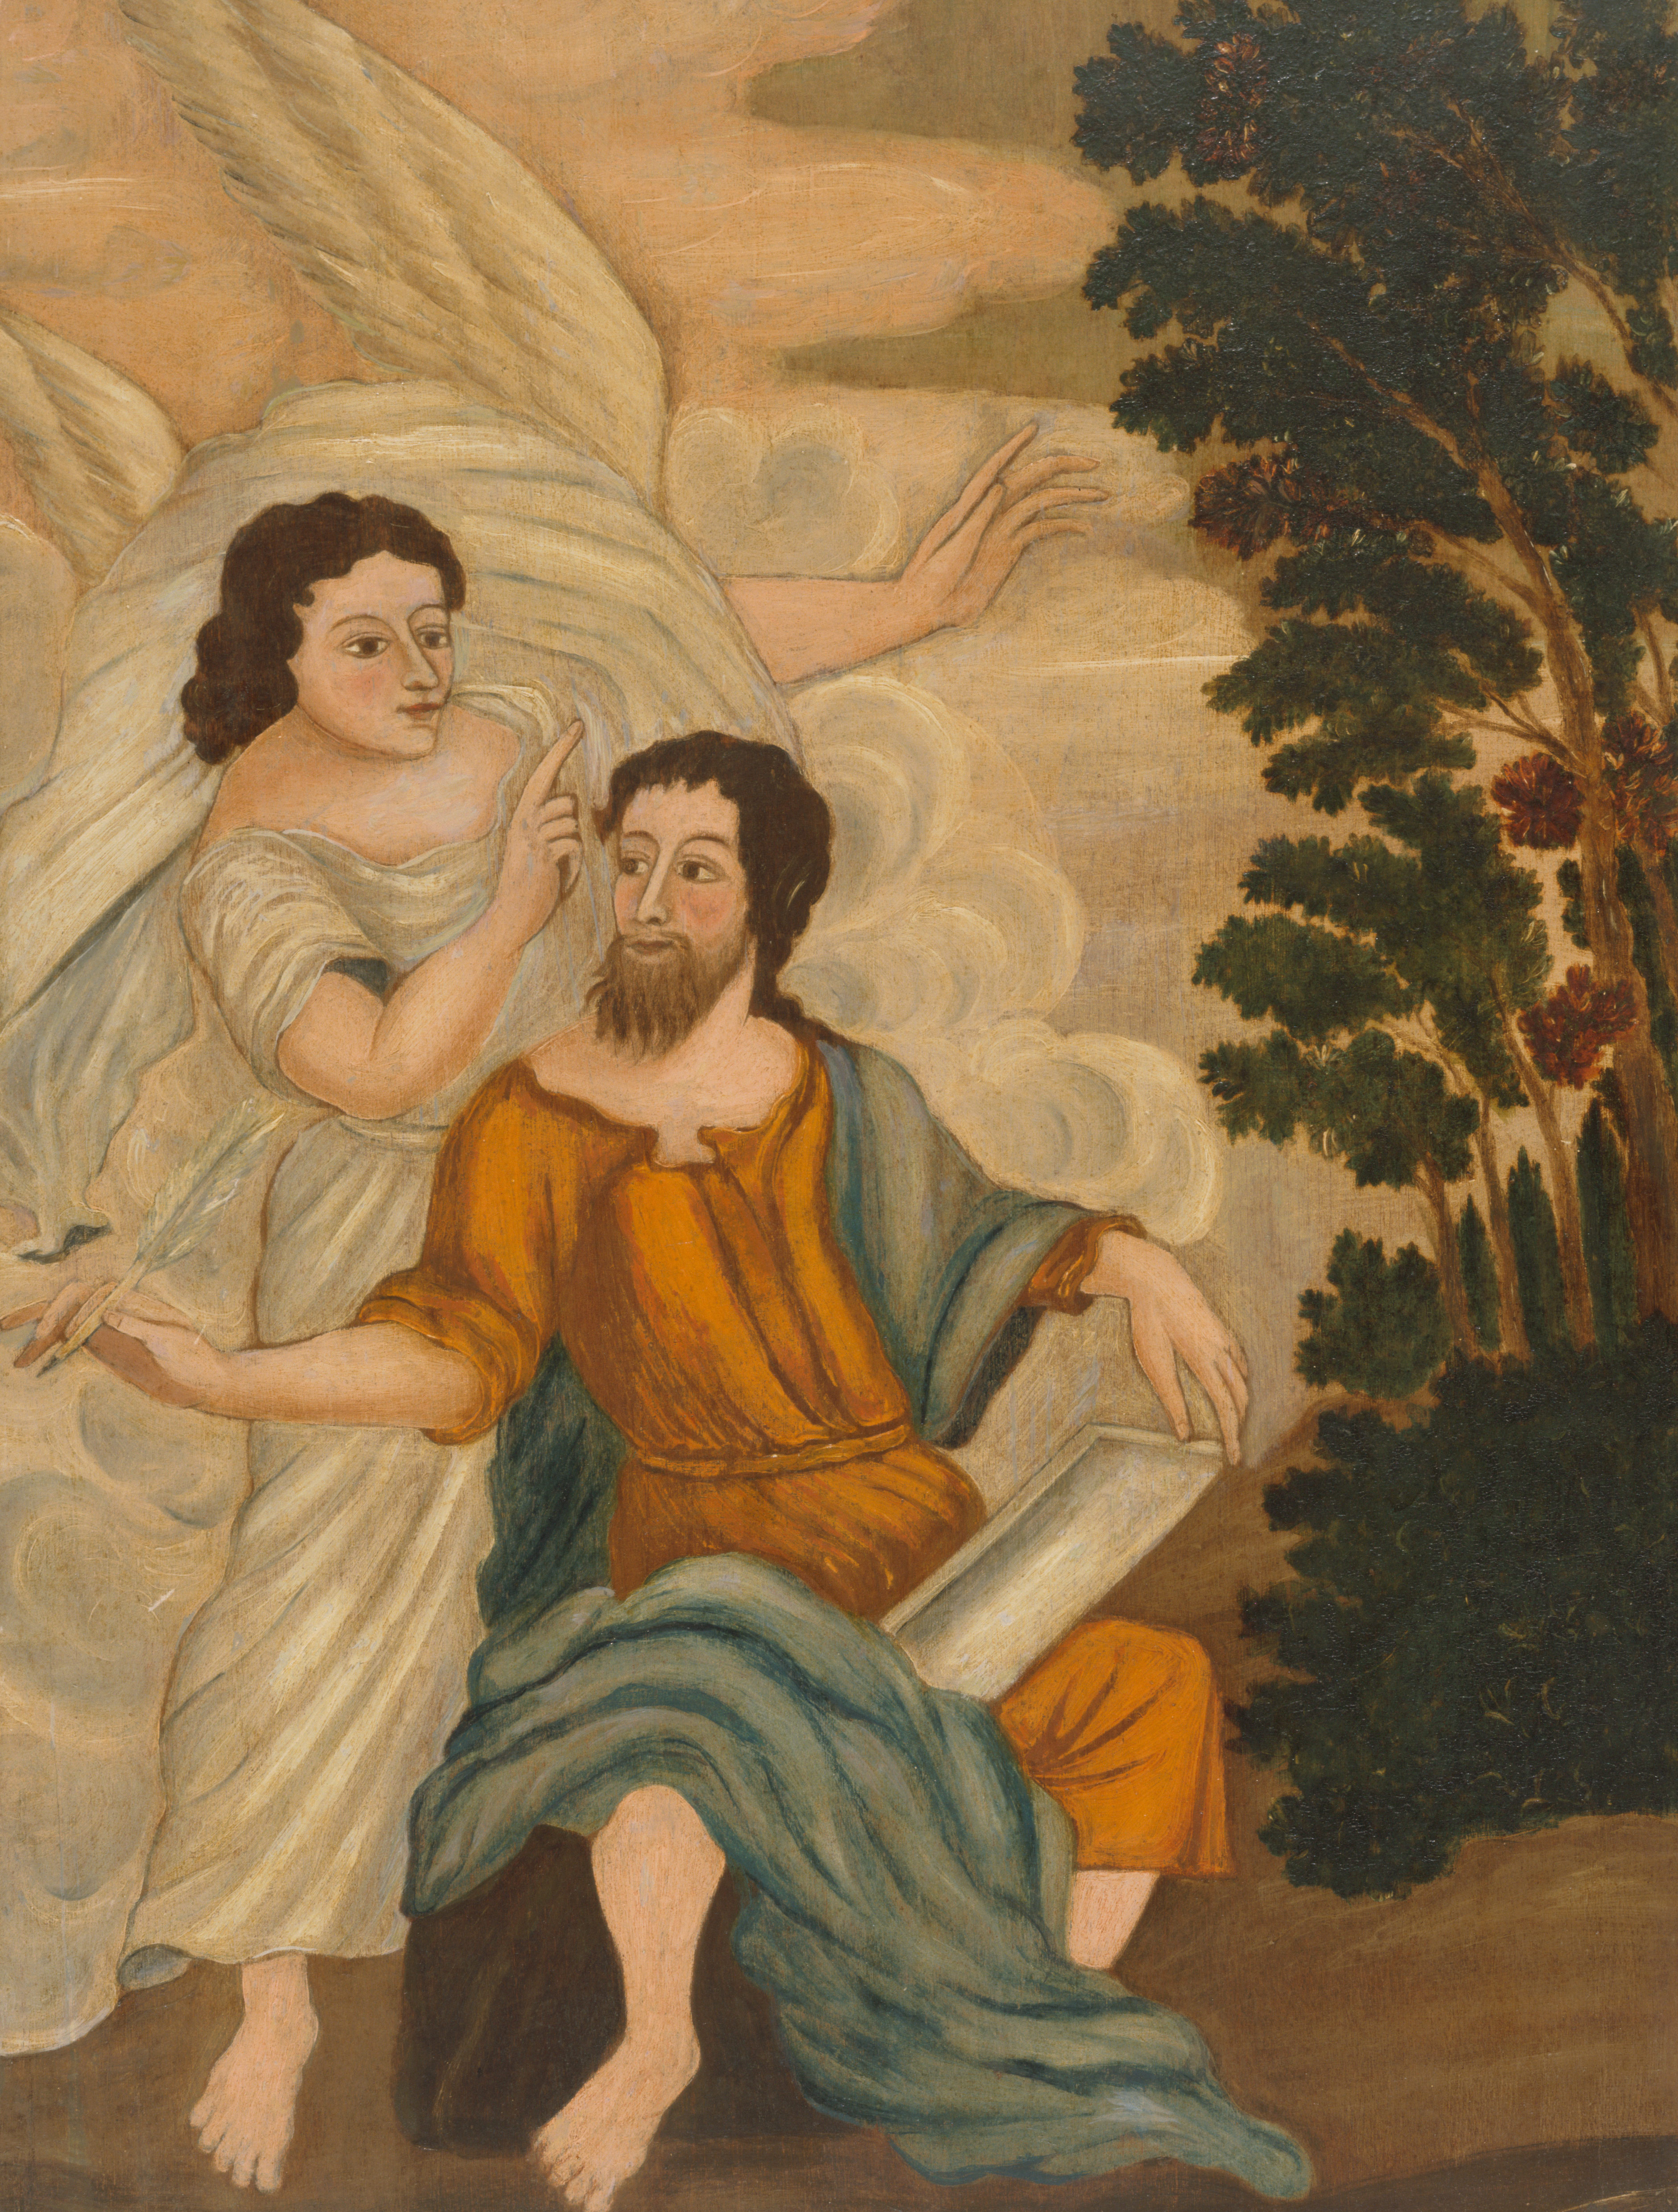 St. Matthew and the Angel by Unidentified artist